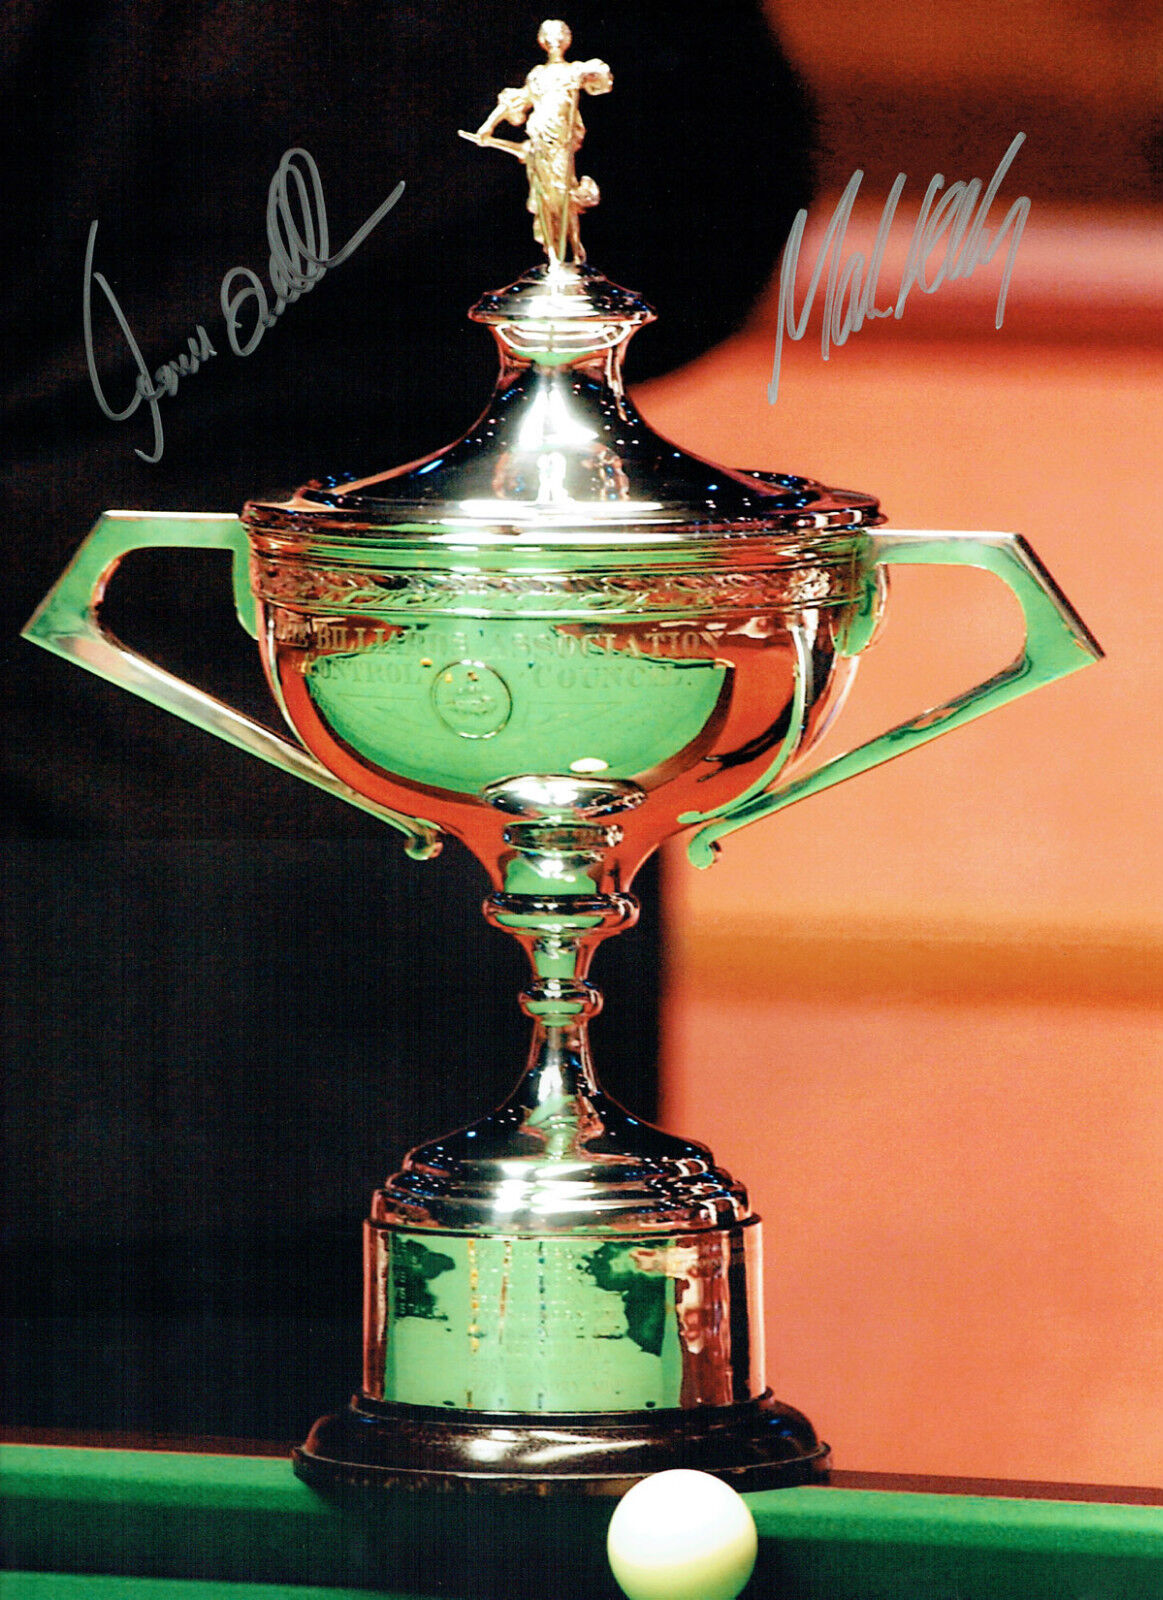 Ronnie O'SULLIVAN & Mark SELBY Signed Autograph 16x12 SNOOKER Photo Poster painting AFTAL COA